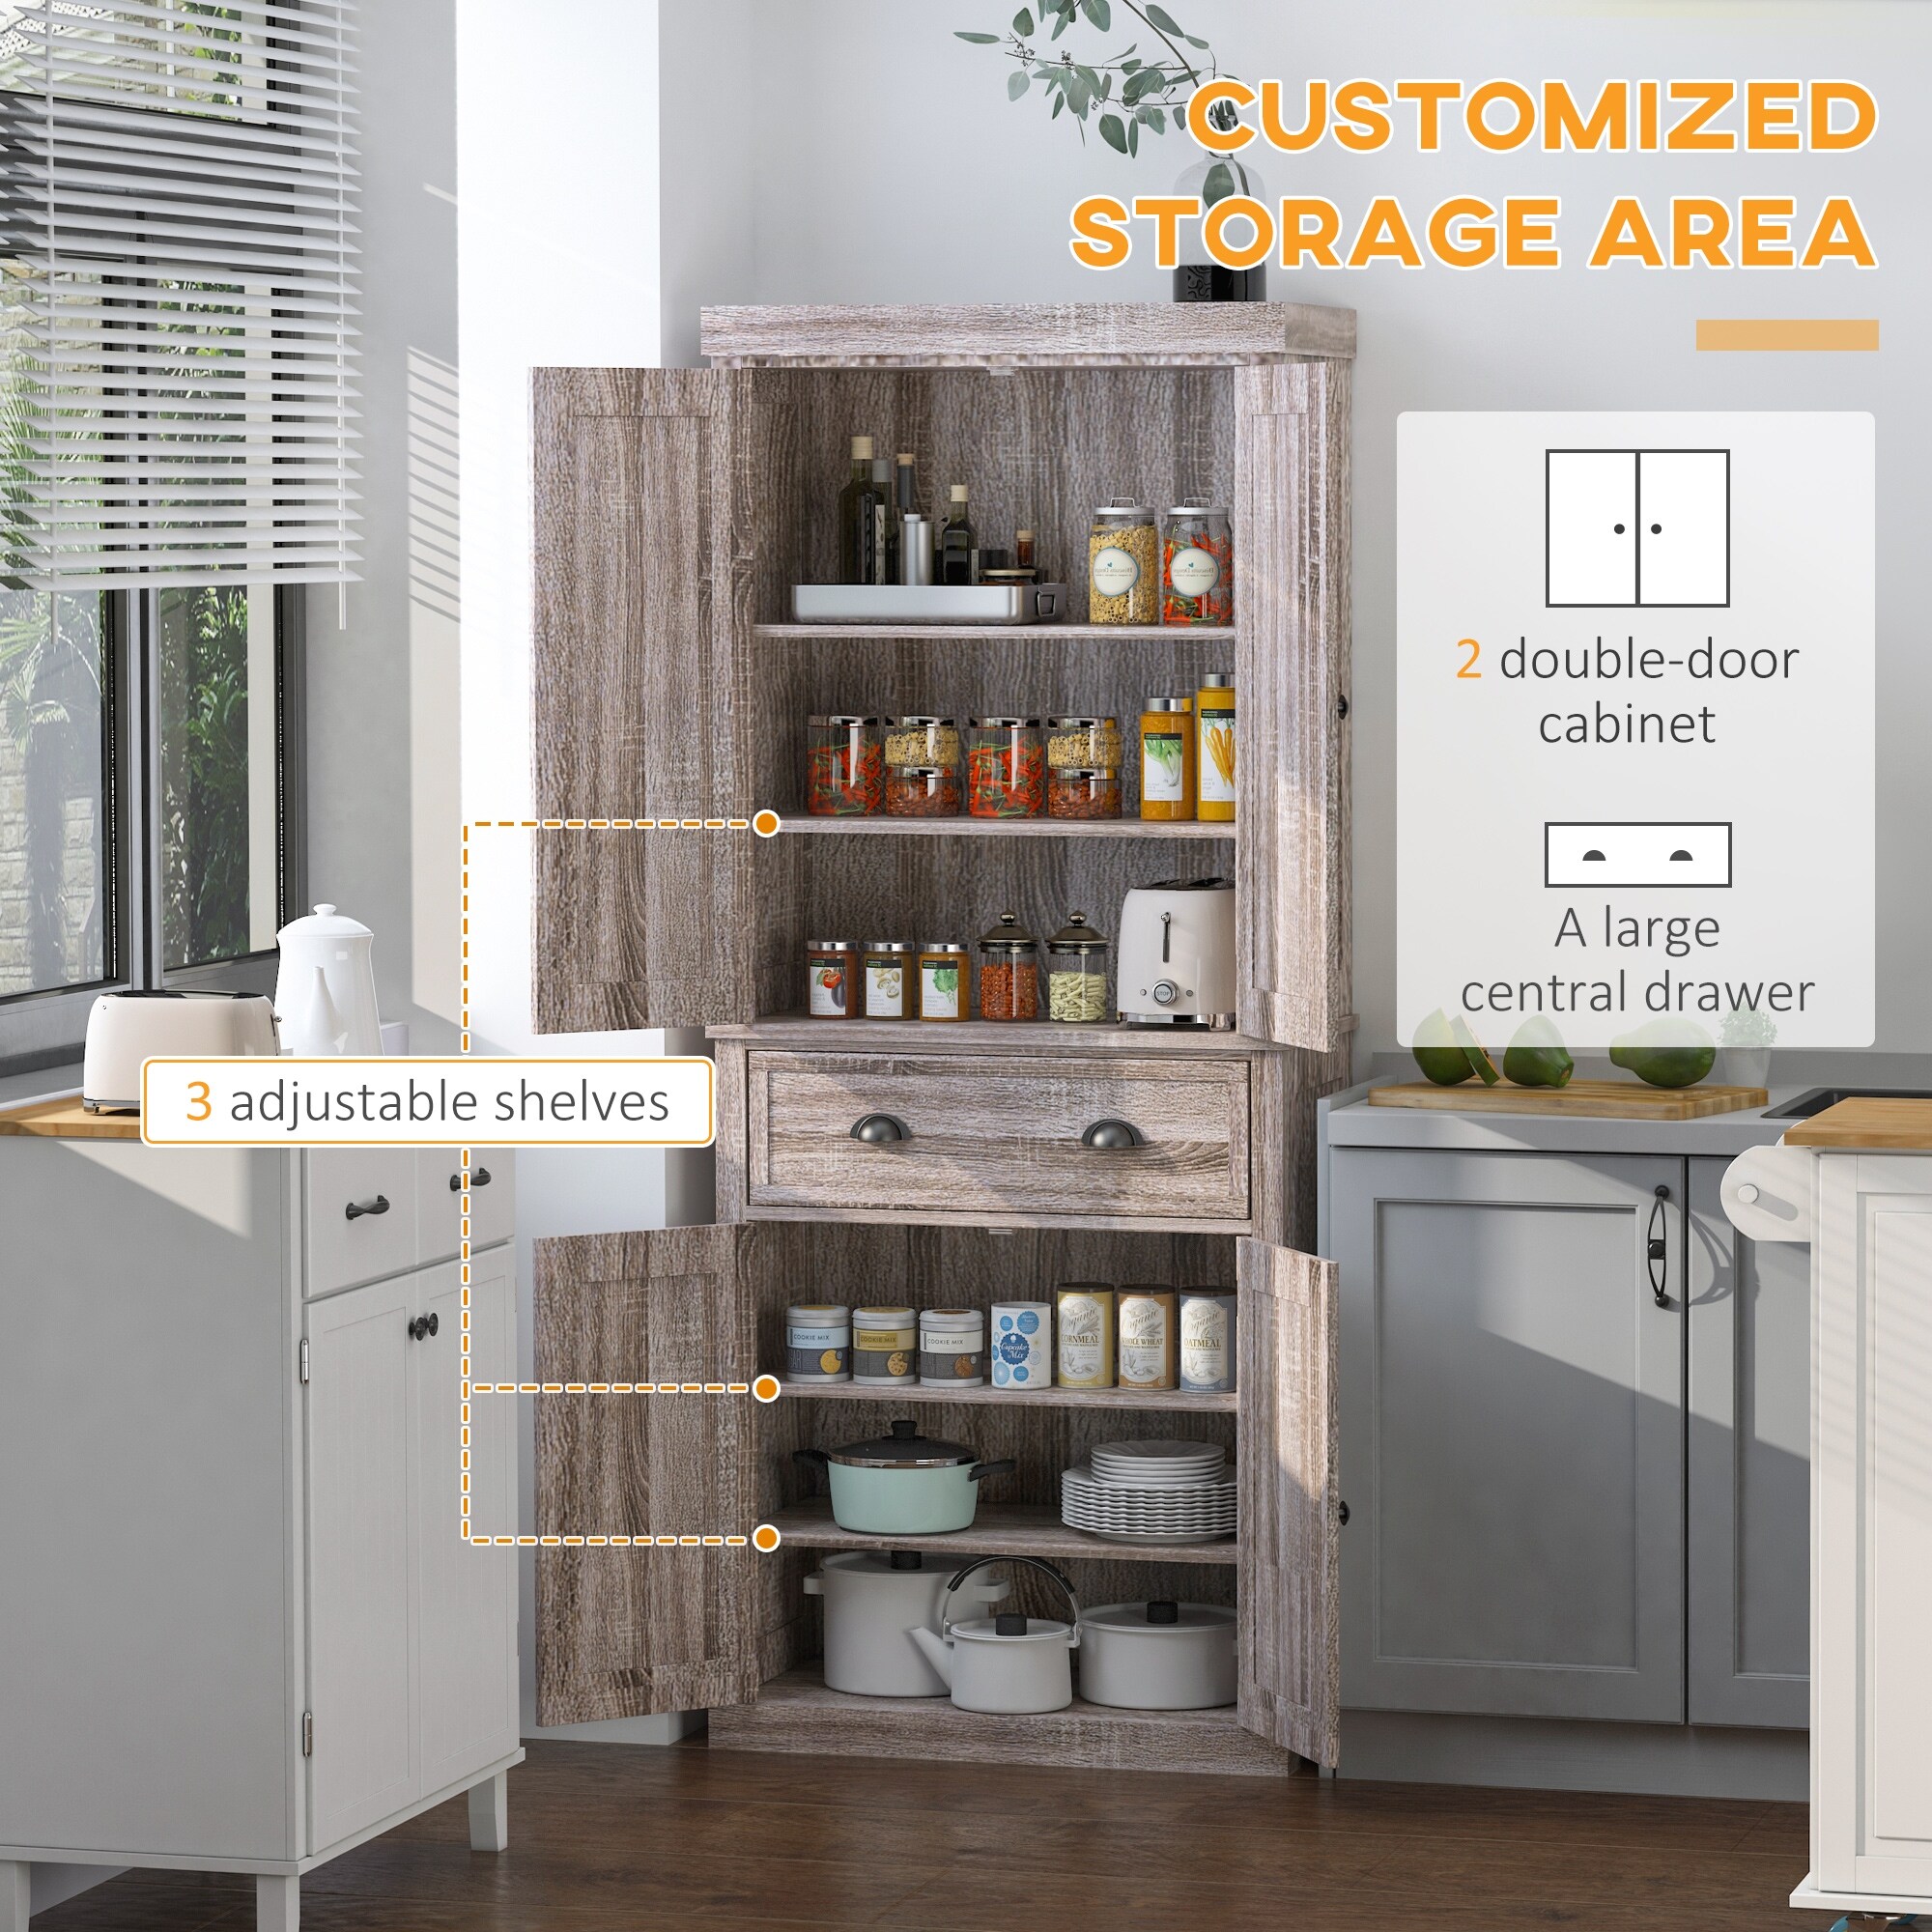 https://ak1.ostkcdn.com/images/products/is/images/direct/cb7a8f581bc27ad07e1a551be86e6943e85dc9e1/Freestanding-Kitchen-Pantry-with-2-Drawers-and-Adjustable-Shelves.jpg